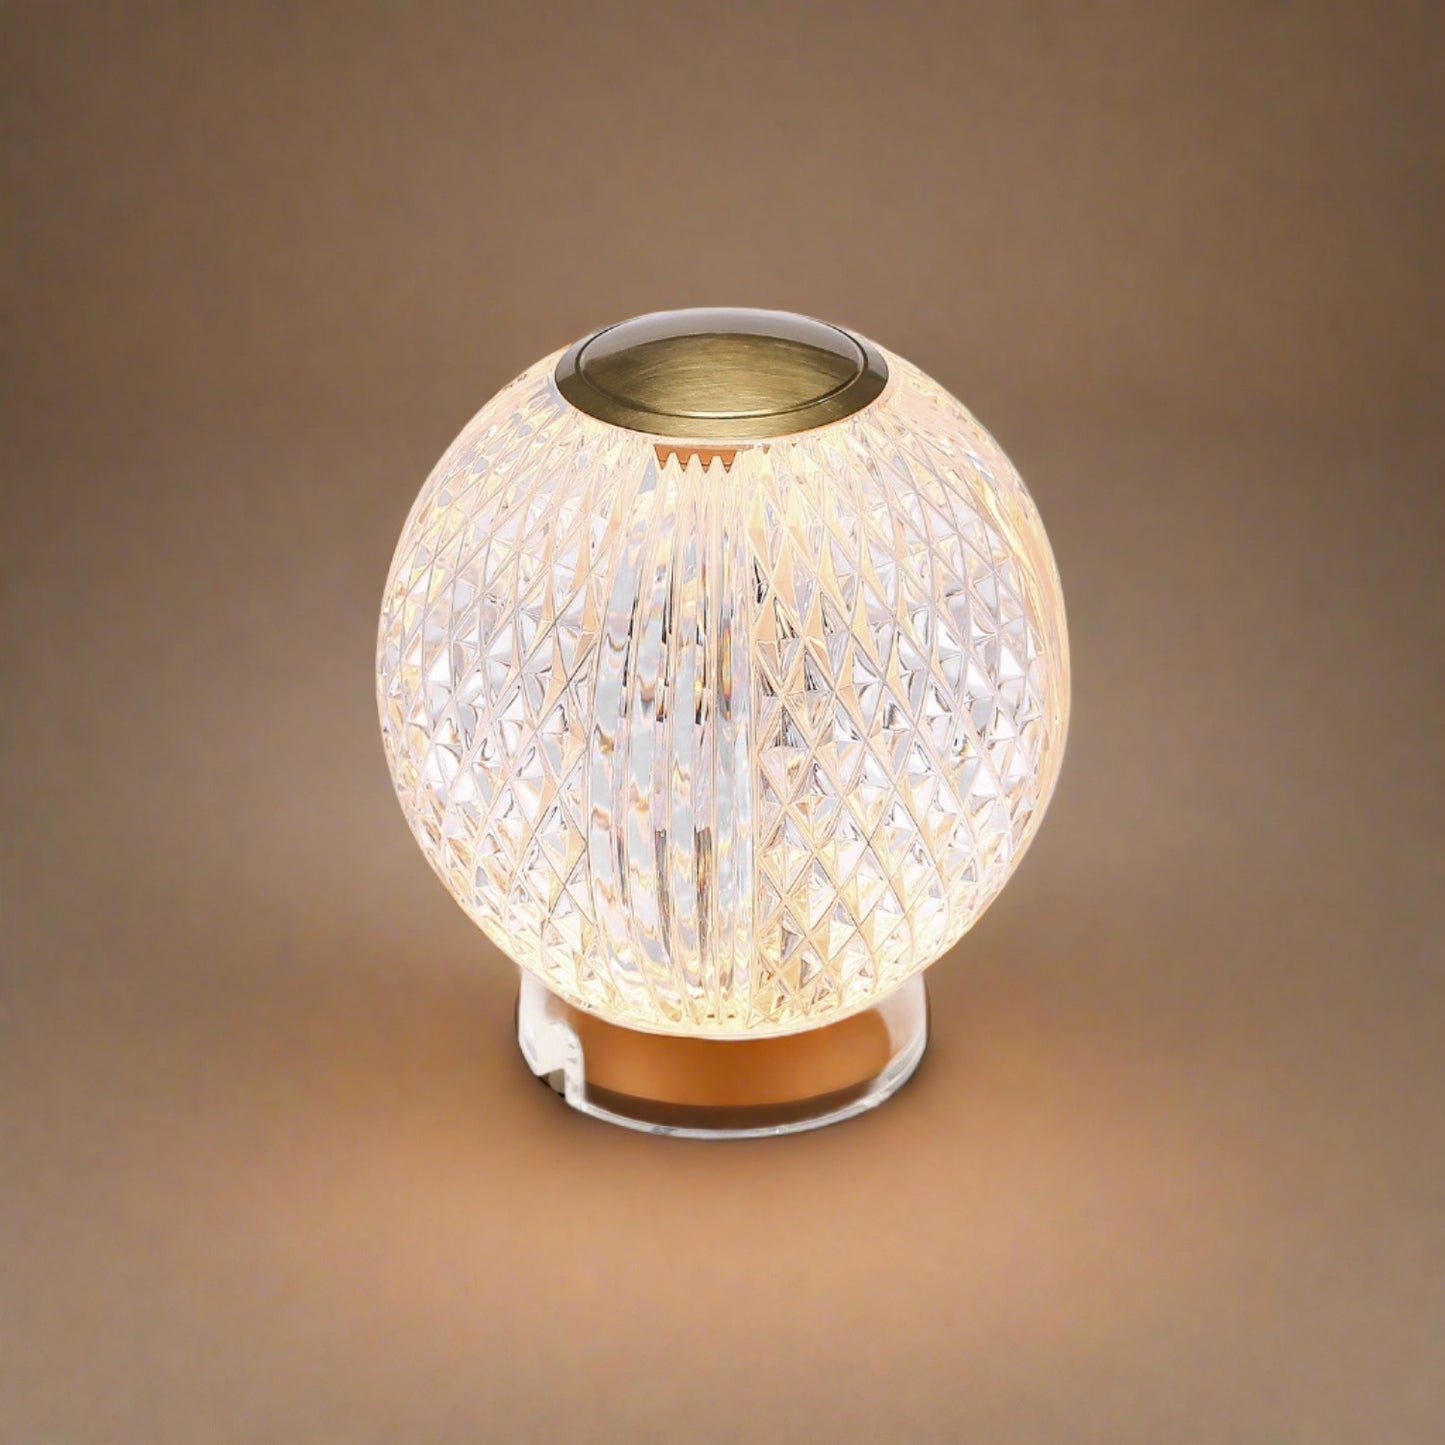 Marni LED Table Lamp by Alora in Natural Brass Finish (TL321903NB)